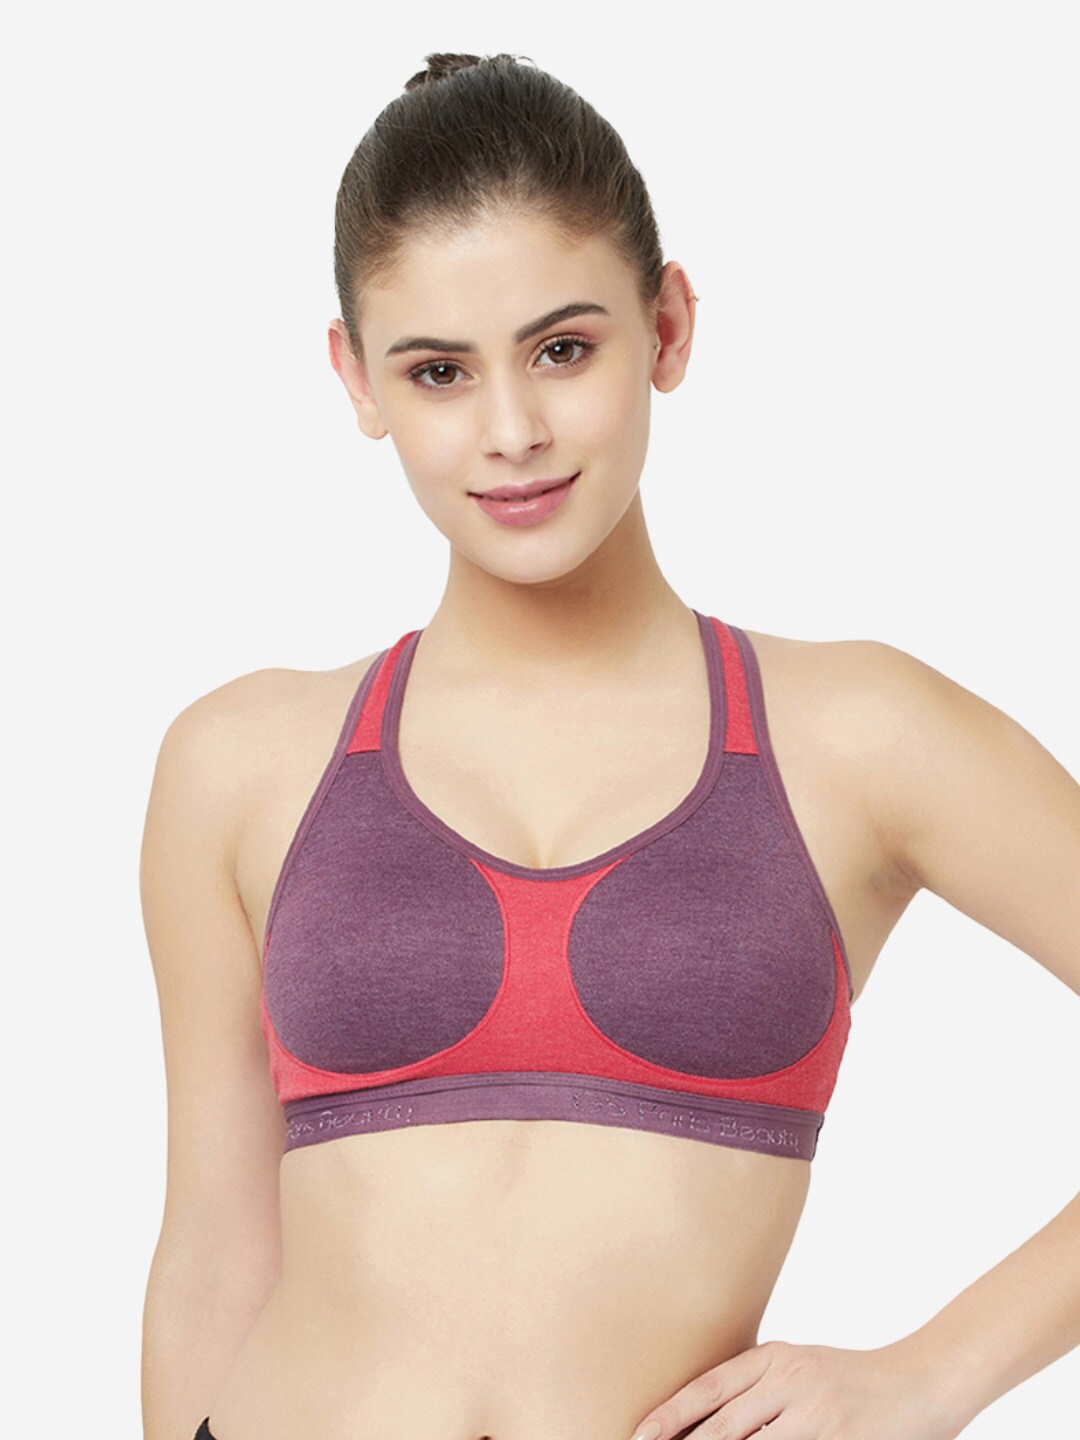 Apraa & Parma Non Padded Double Layer Sports Bra For Women And